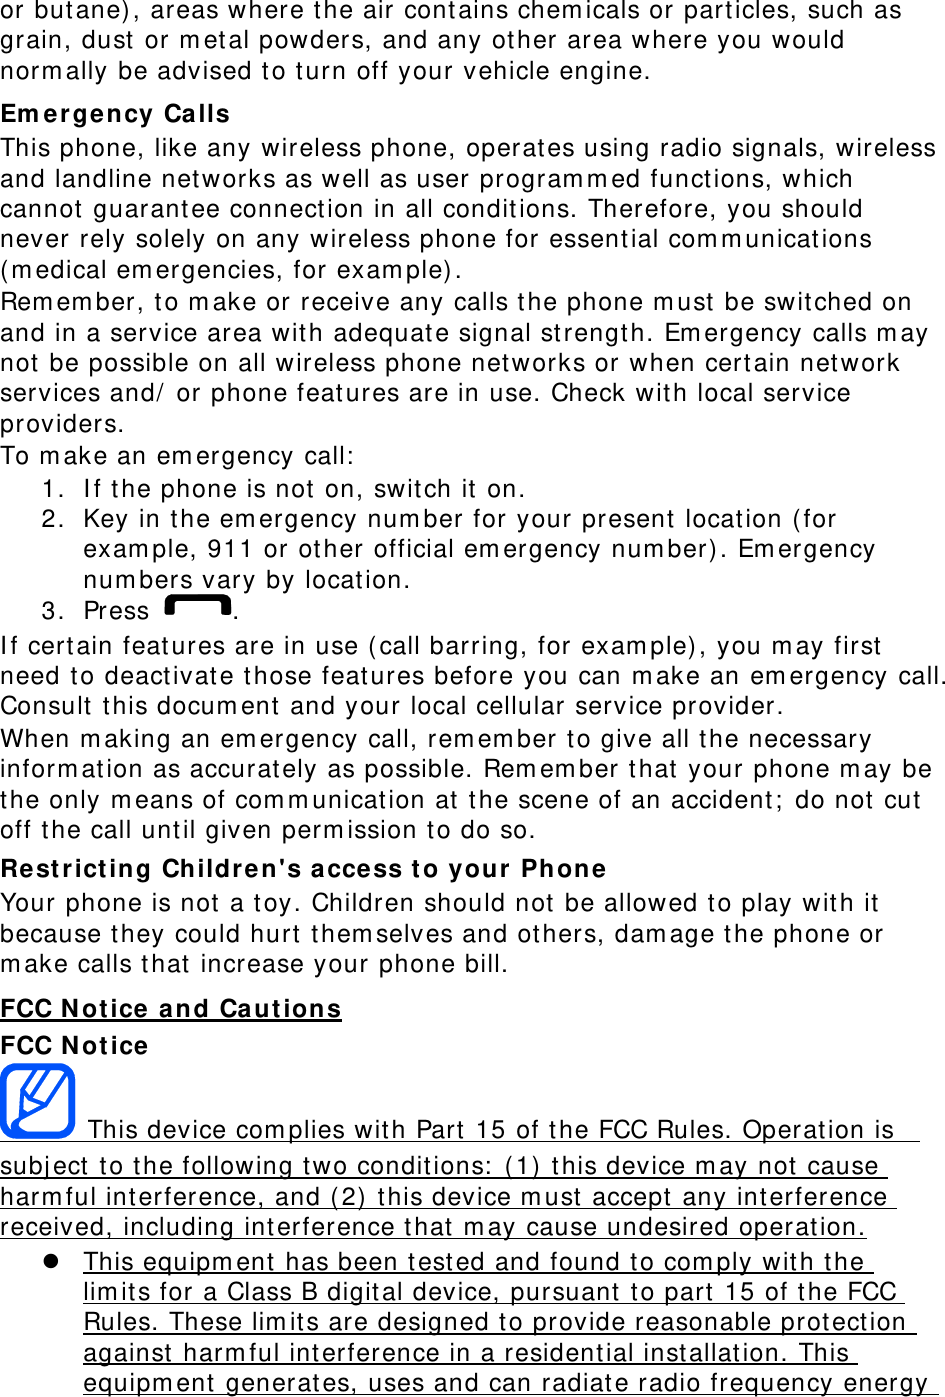 or but ane) , areas where the air contains chem icals or part icles, such as grain, dust  or m et al powders, and any other area where you would norm ally be advised t o t urn off your vehicle engine. Em ergency Calls This phone, like any wireless phone, operat es using radio signals, wireless and landline net works as well as user program m ed funct ions, which cannot  guarant ee connect ion in all condit ions. Therefore, you should never rely solely on any wireless phone for essent ial com m unicat ions ( m edical em ergencies, for exam ple) . Rem em ber, t o m ake or receive any calls t he phone m ust  be swit ched on and in a service area wit h adequat e signal st rengt h. Em ergency calls m ay not  be possible on all wireless phone net works or when certain net work services and/  or phone feat ures are in use. Check wit h local service providers. To m ake an em ergency call:  1. I f t he phone is not  on, swit ch it on. 2. Key in t he em ergency num ber for your present locat ion ( for exam ple, 911 or ot her official em ergency num ber) . Em ergency num bers vary by locat ion. 3. Press  . I f certain feat ures are in use ( call barring, for exam ple) , you m ay first  need to deact ivat e t hose feat ures before you can m ake an em ergency call. Consult  t his docum ent  and your local cellular service provider. When m aking an em ergency call, rem em ber t o give all t he necessary inform at ion as accurat ely as possible. Rem em ber that  your phone m ay be the only m eans of com m unication at  the scene of an accident;  do not cut off the call until given perm ission t o do so. Re st rict ing Children&apos;s access t o your Phone Your phone is not a toy. Children should not be allowed to play wit h it because t hey could hurt  them selves and ot hers, dam age t he phone or m ake calls t hat  increase your phone bill. FCC N ot ice a nd Ca utions FCC N ot ice  This device com plies wit h Part  15 of t he FCC Rules. Operat ion is   subj ect  to the following t wo condit ions:  ( 1)  t his device m ay not cause harm ful interference, and (2)  t his device m ust accept  any interference received, including int erference t hat  m ay cause undesired operat ion.  This equipm ent has been test ed and found to com ply with the lim it s for a Class B digital device, pursuant t o part 15 of the FCC Rules. These lim it s are designed to provide reasonable prot ect ion against  harm ful interference in a residential inst allat ion. This equipm ent generat es, uses and can radiat e radio frequency energy 